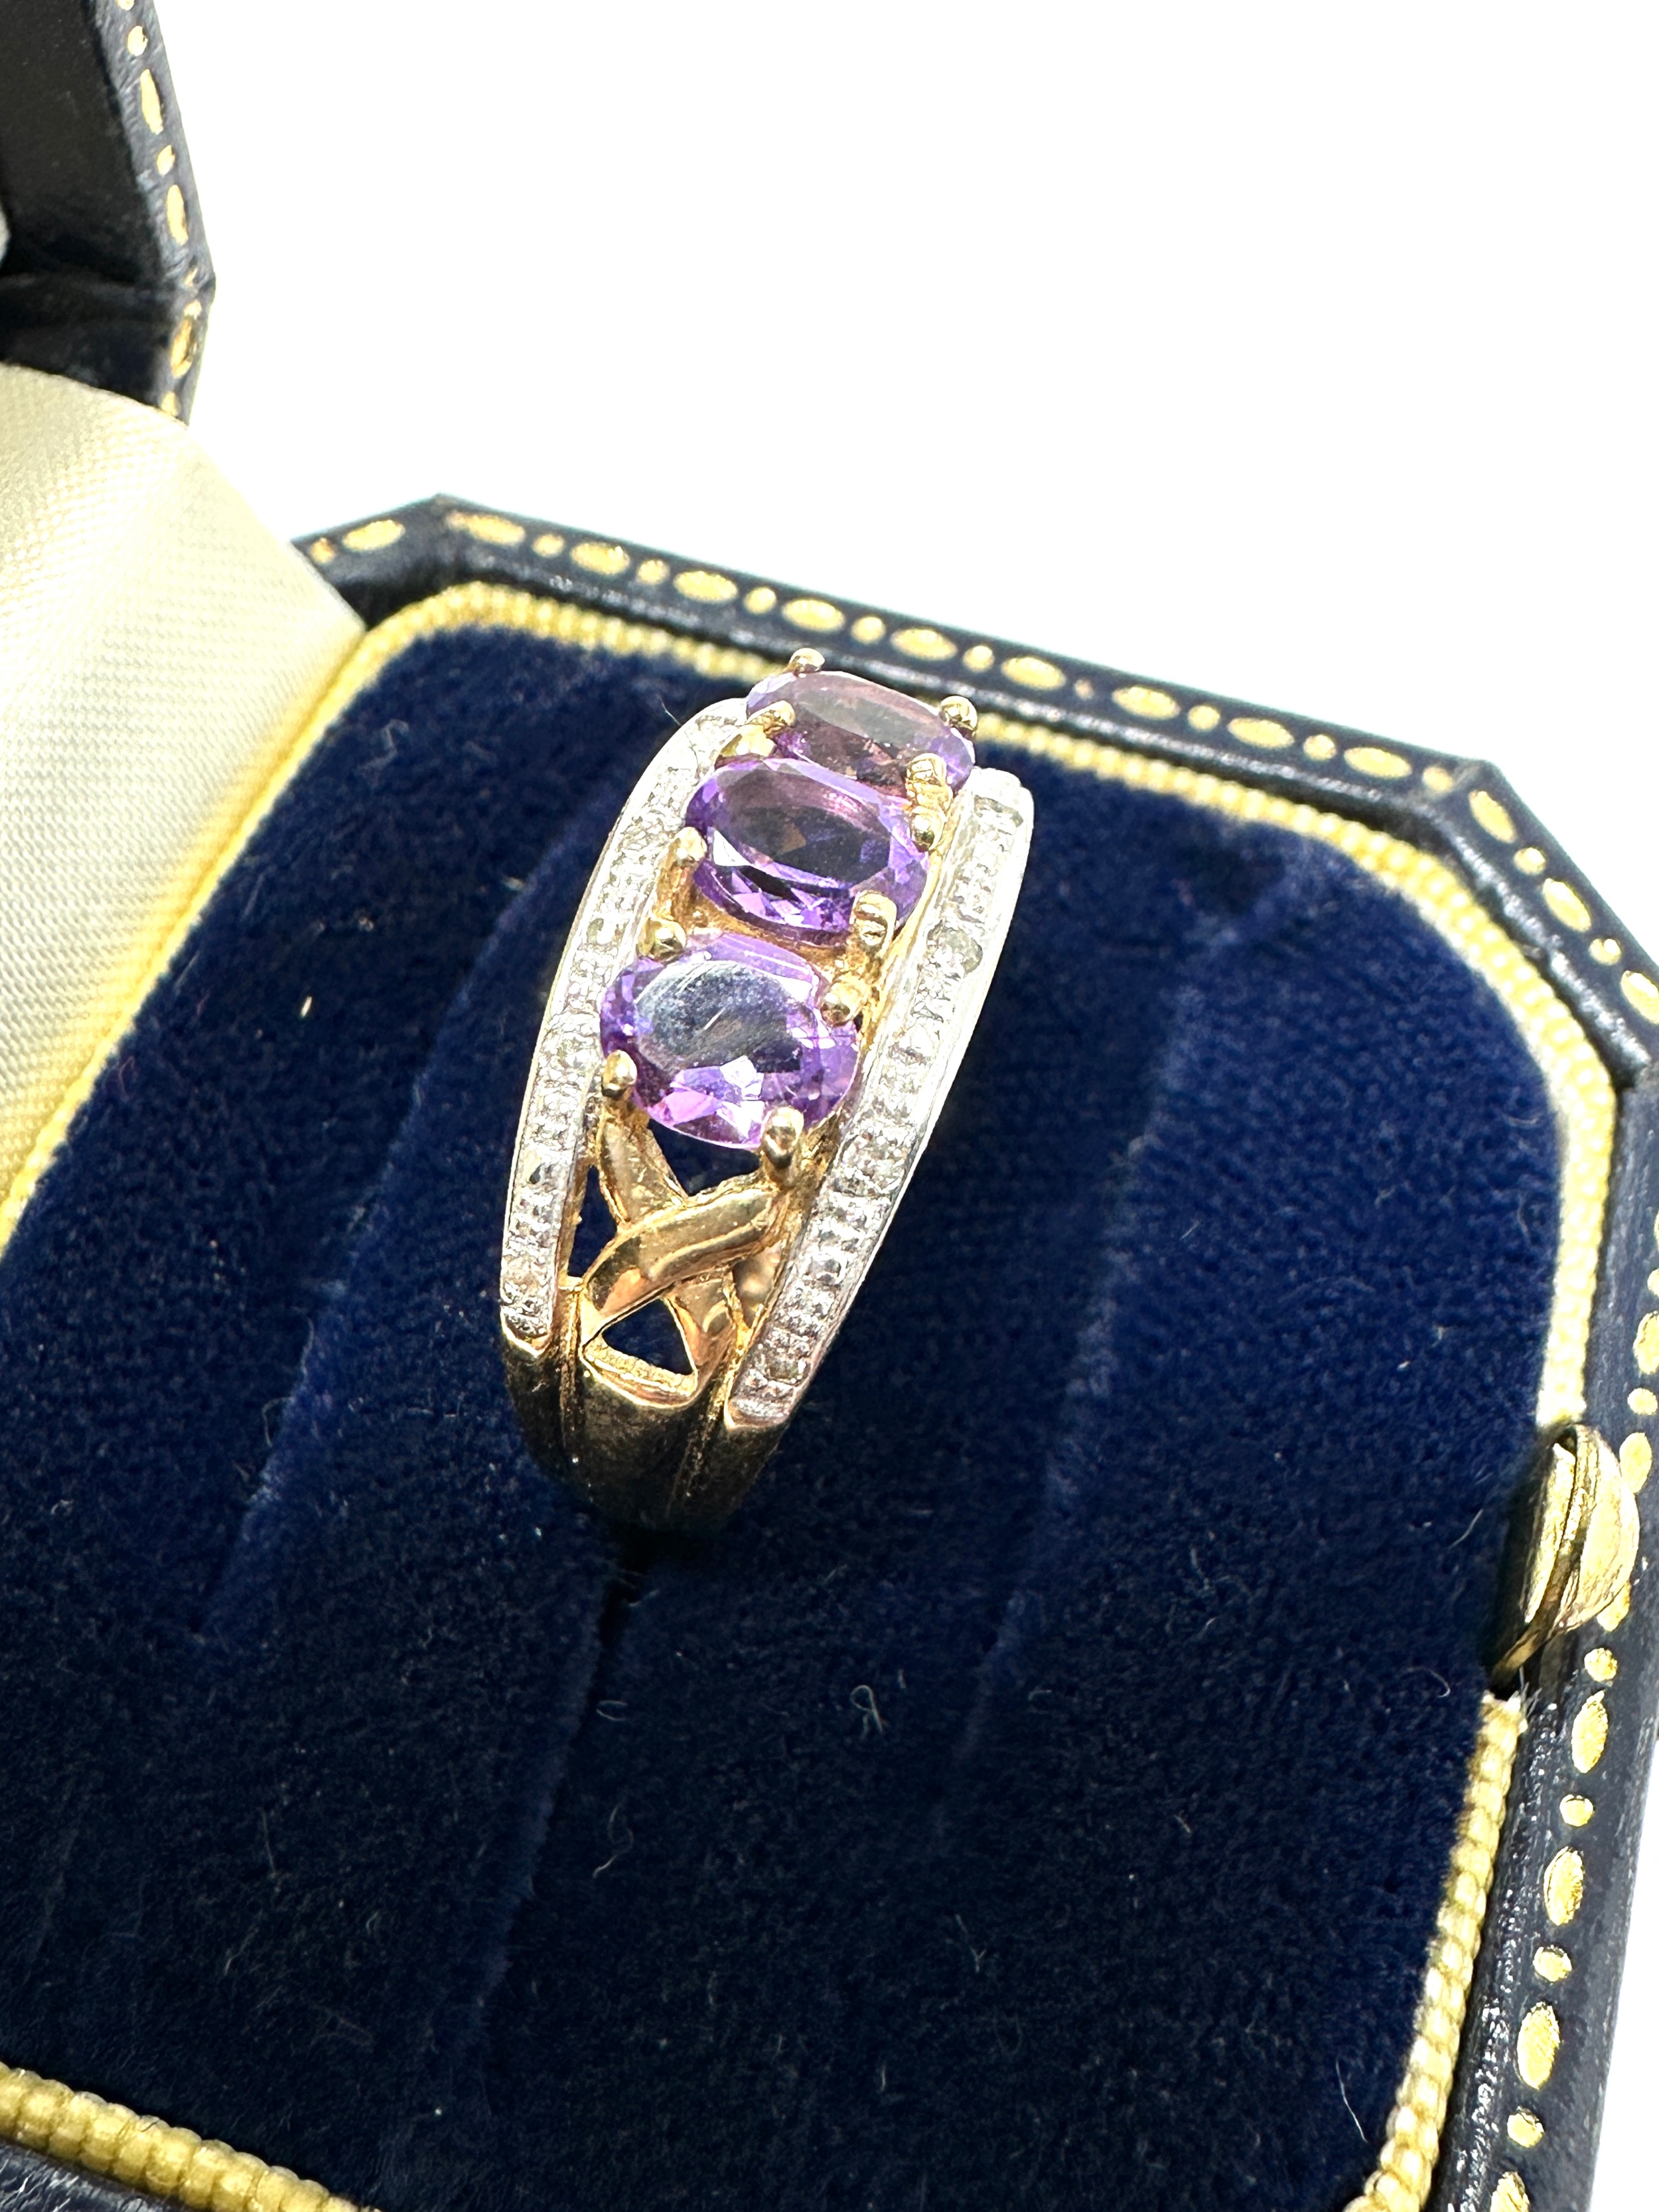 9ct gold amethyst & diamond ring weight 3.8g - Image 3 of 4